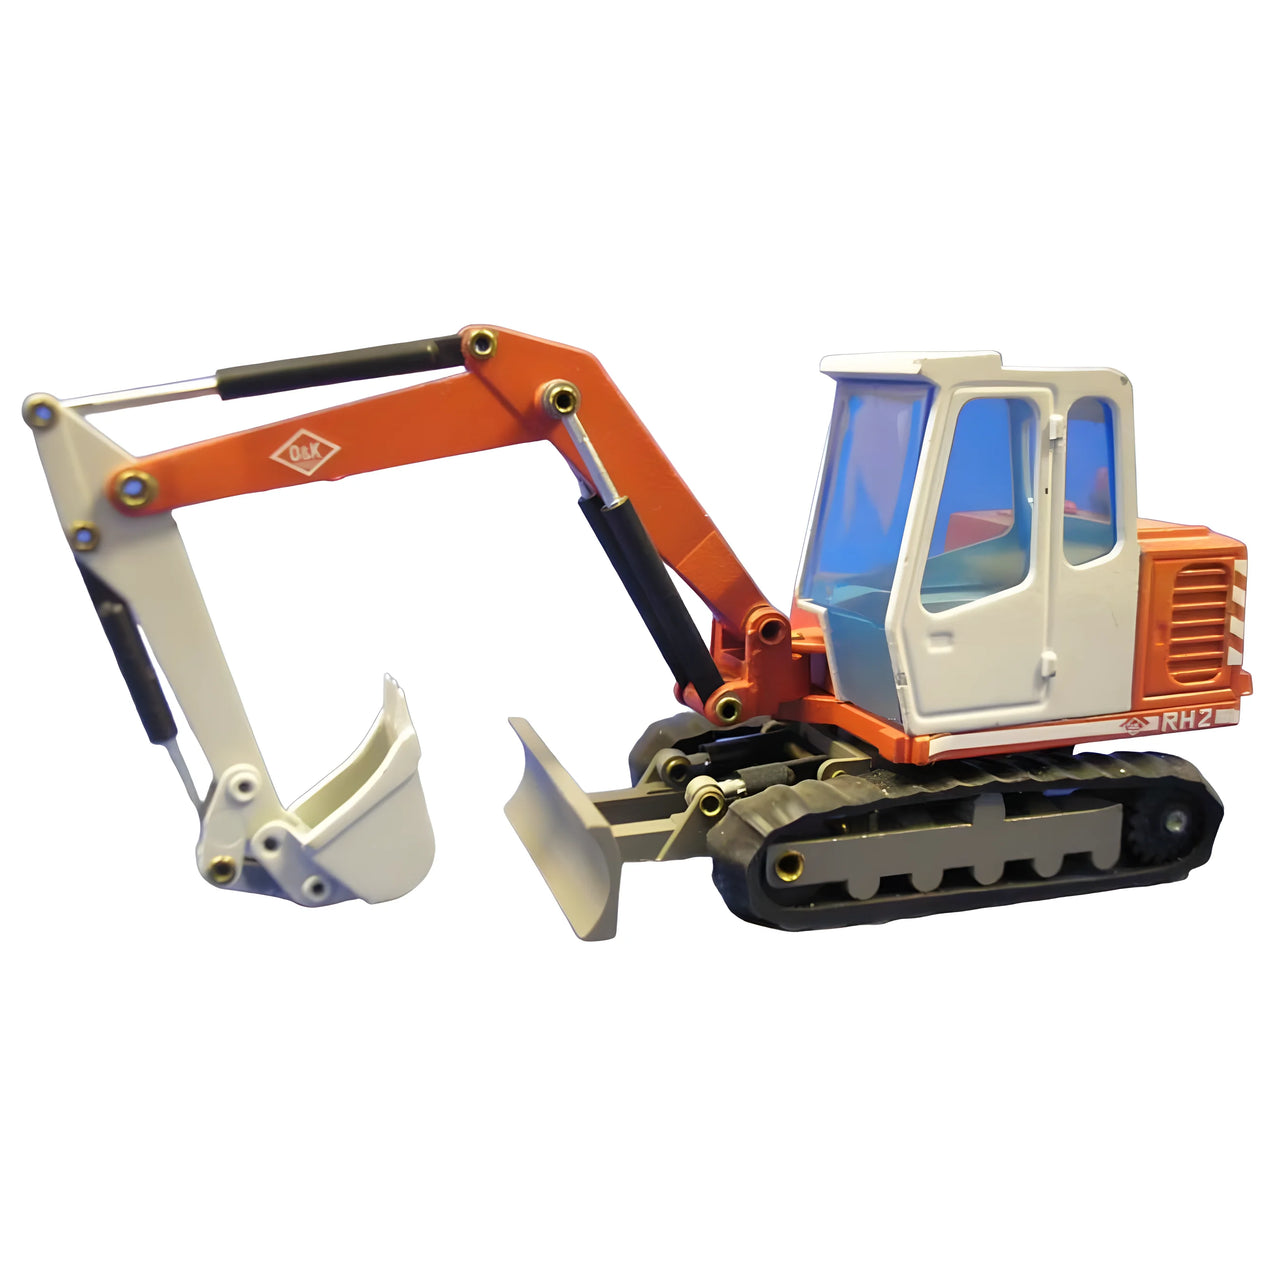 288 O&amp;K RH2 Tracked Excavator Scale 1:50 (Discontinued Model)